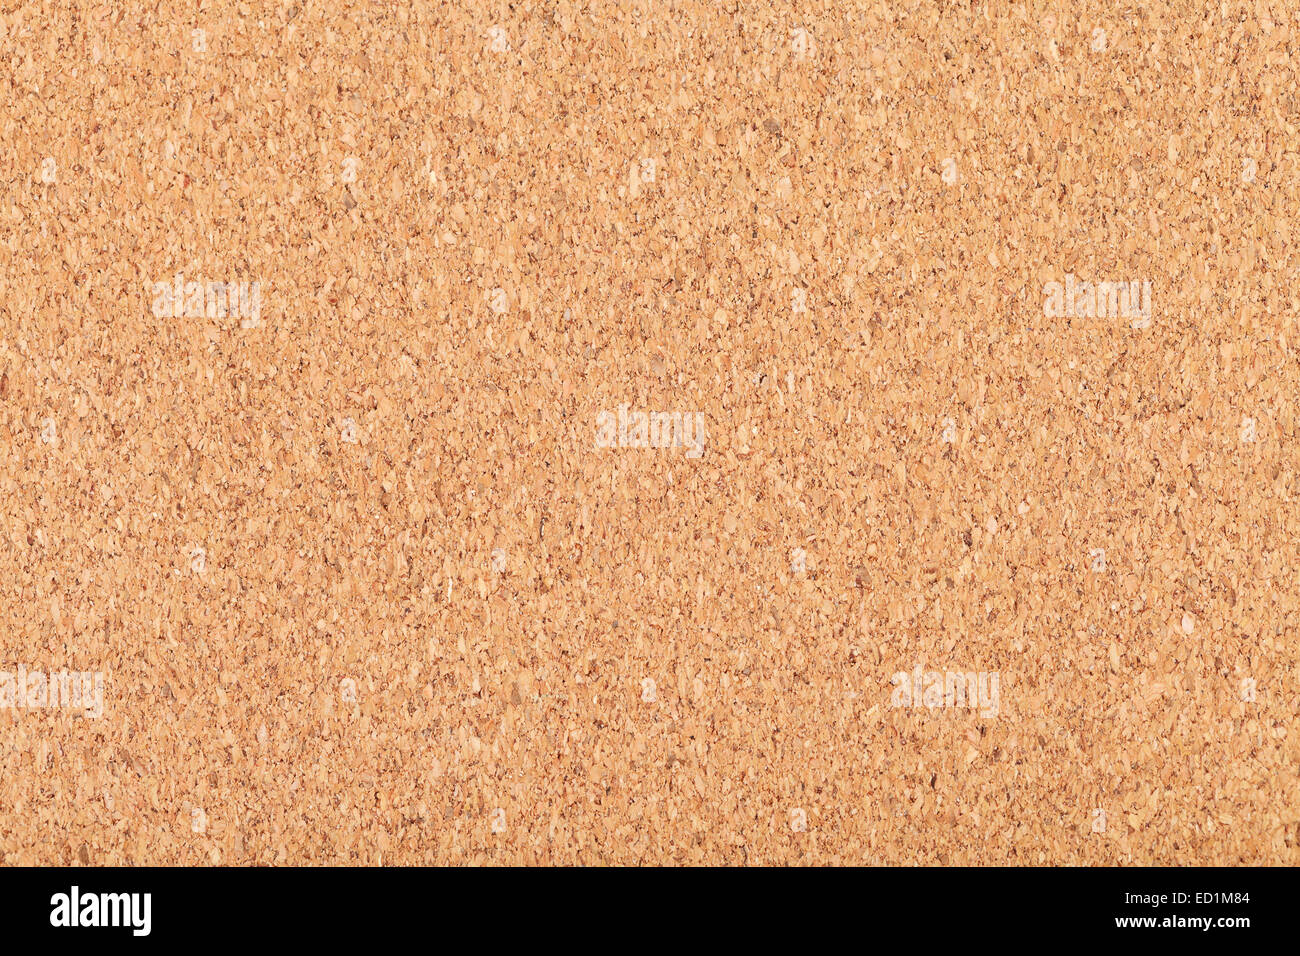 background from sheet of natural wooden cork close up Stock Photo